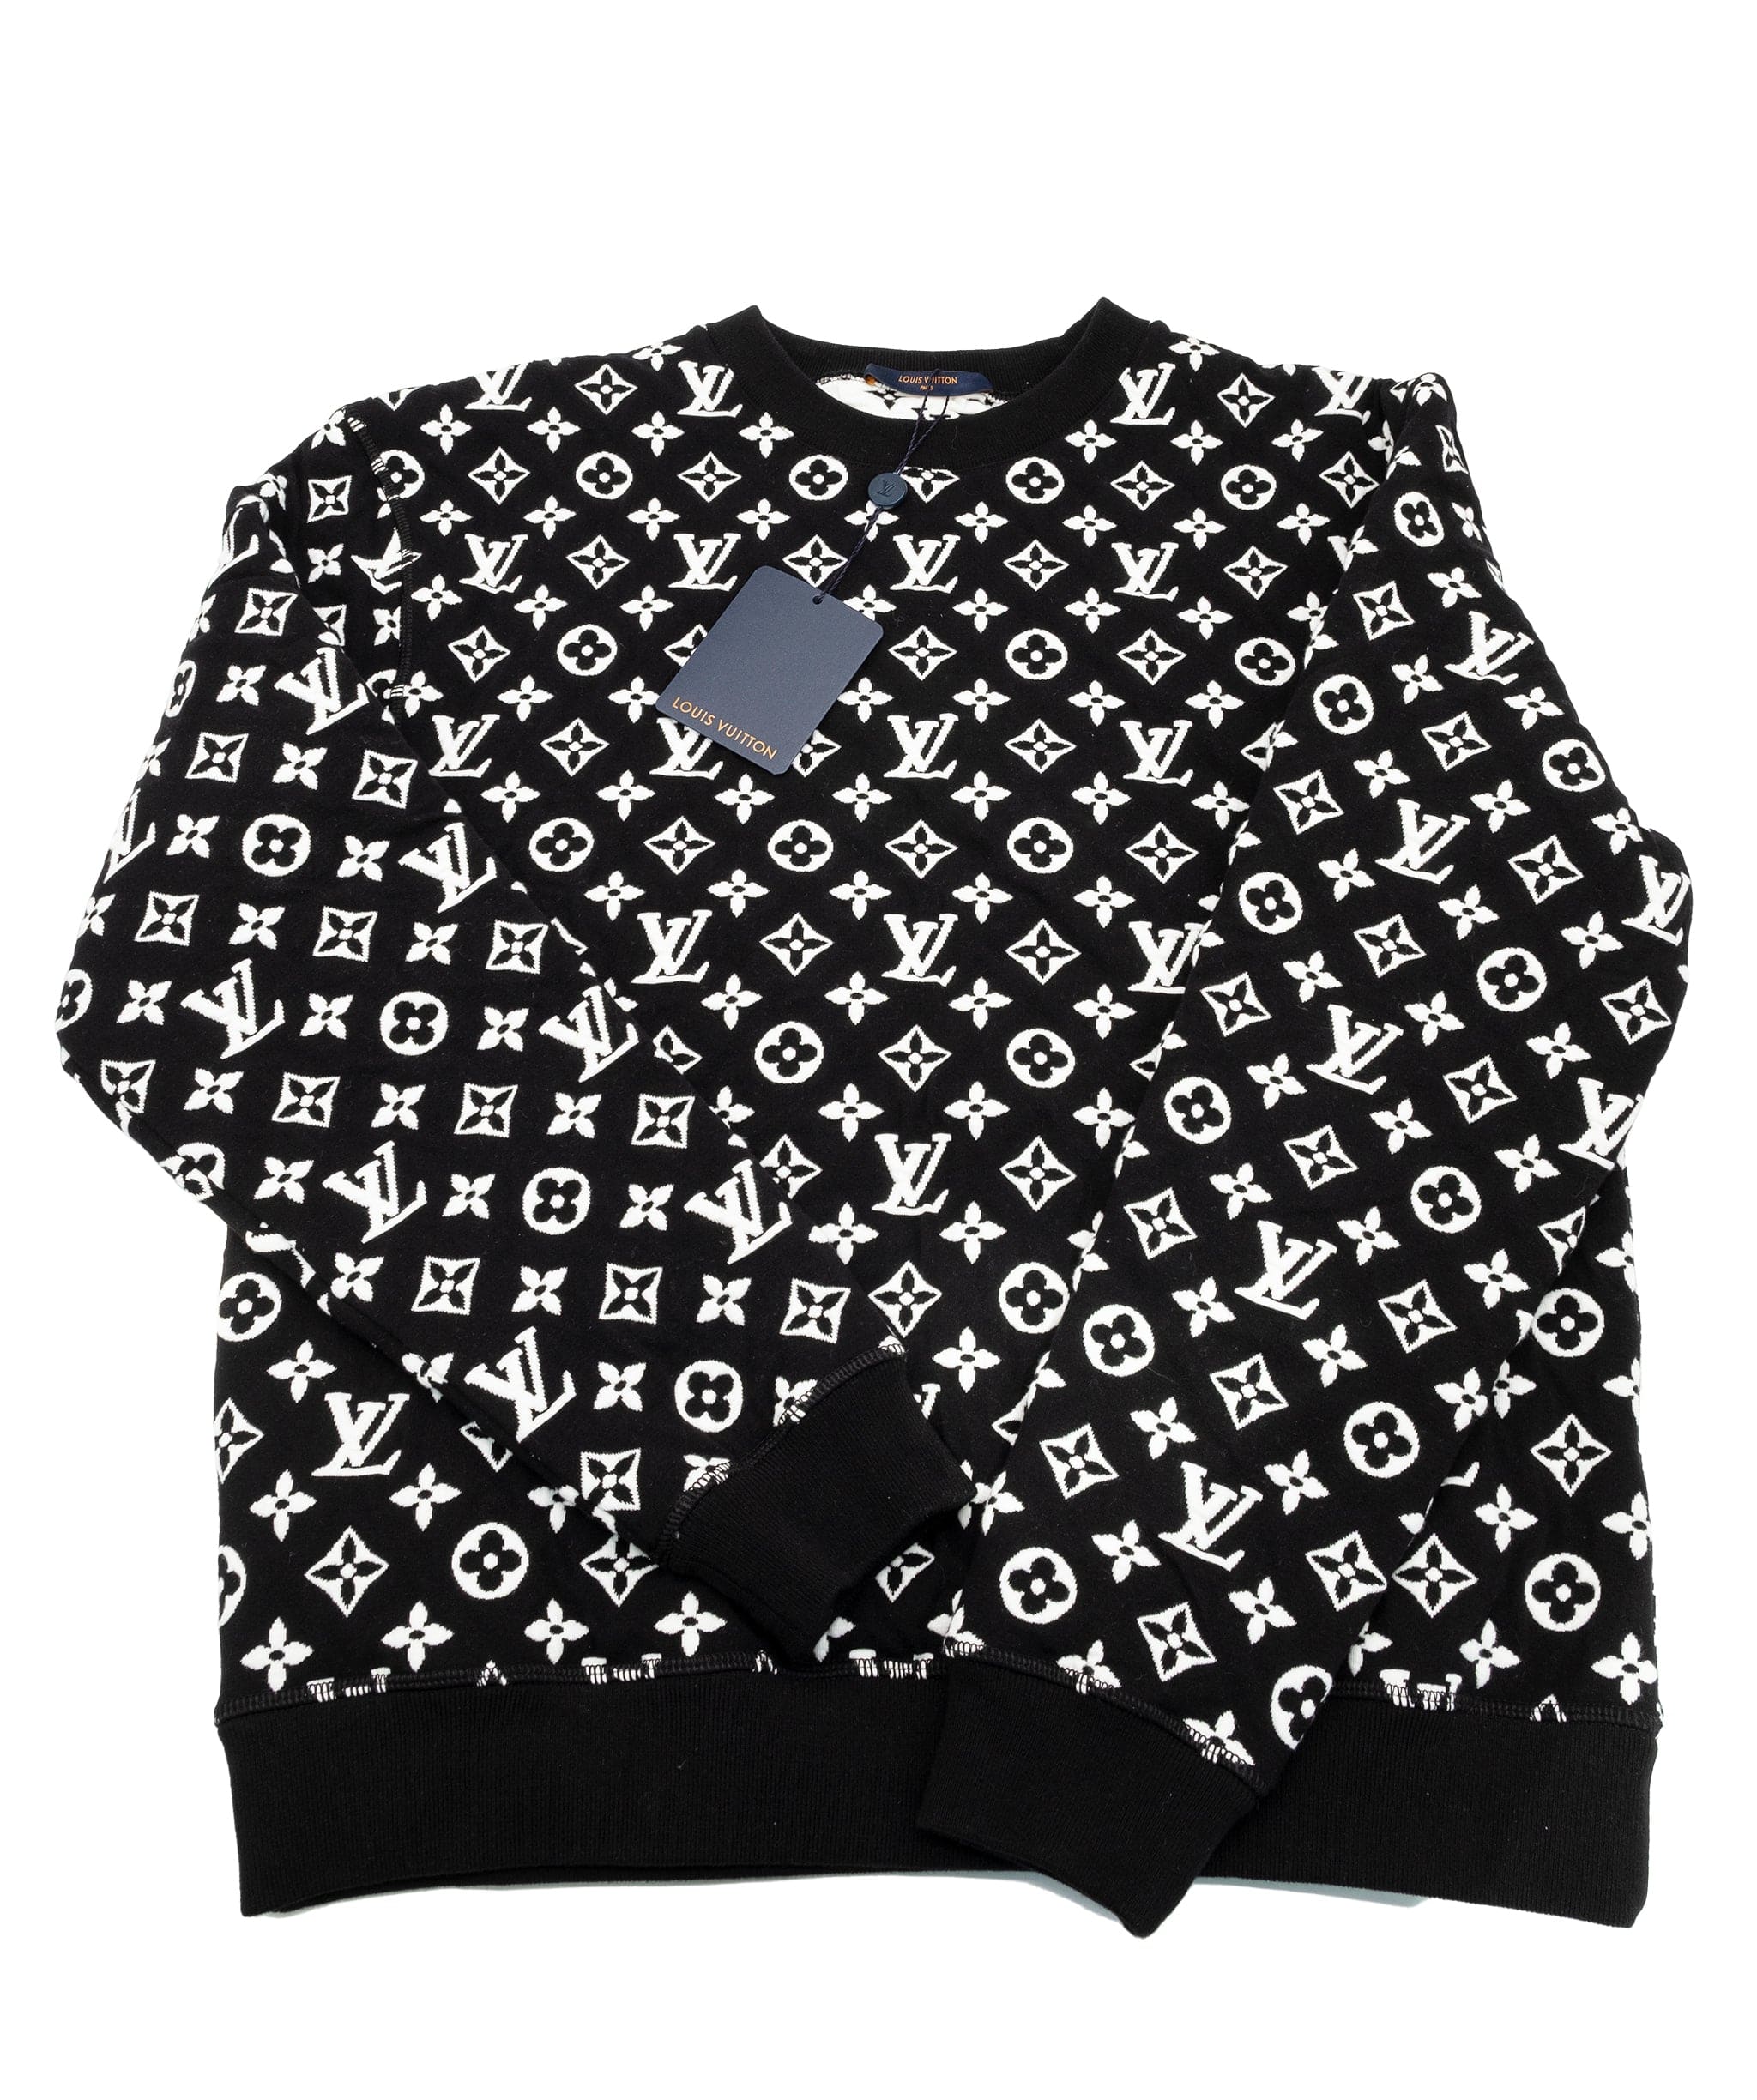 louis vuitton sweater black and white